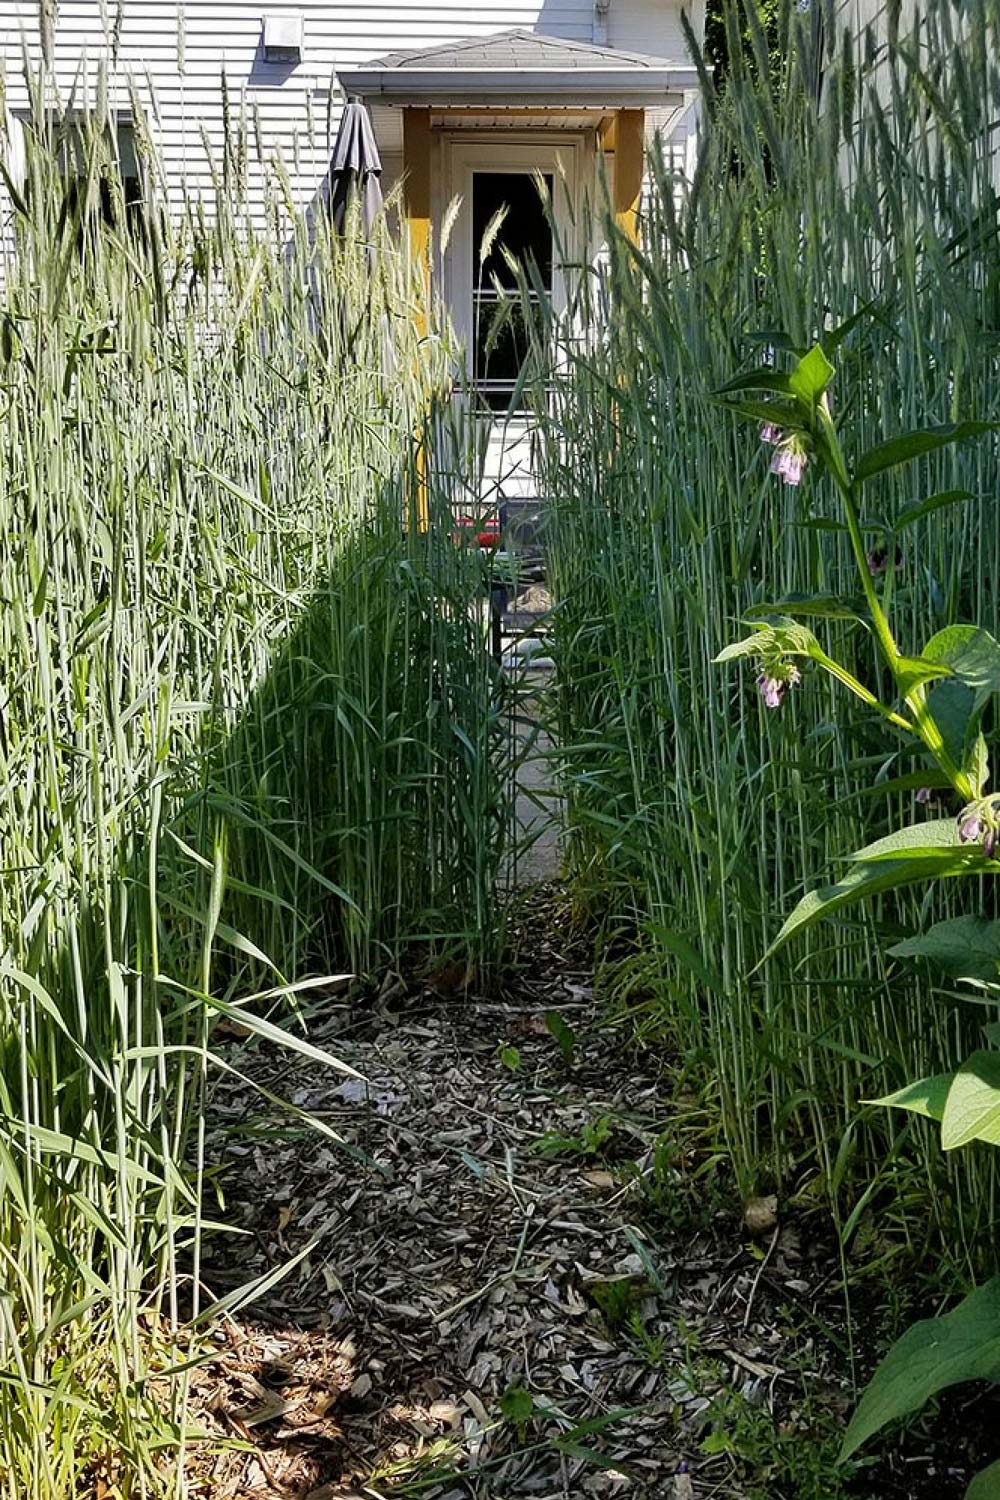 Why I Grew a ‘Crazy’ Rye Grass Cover Crop in My Backyard